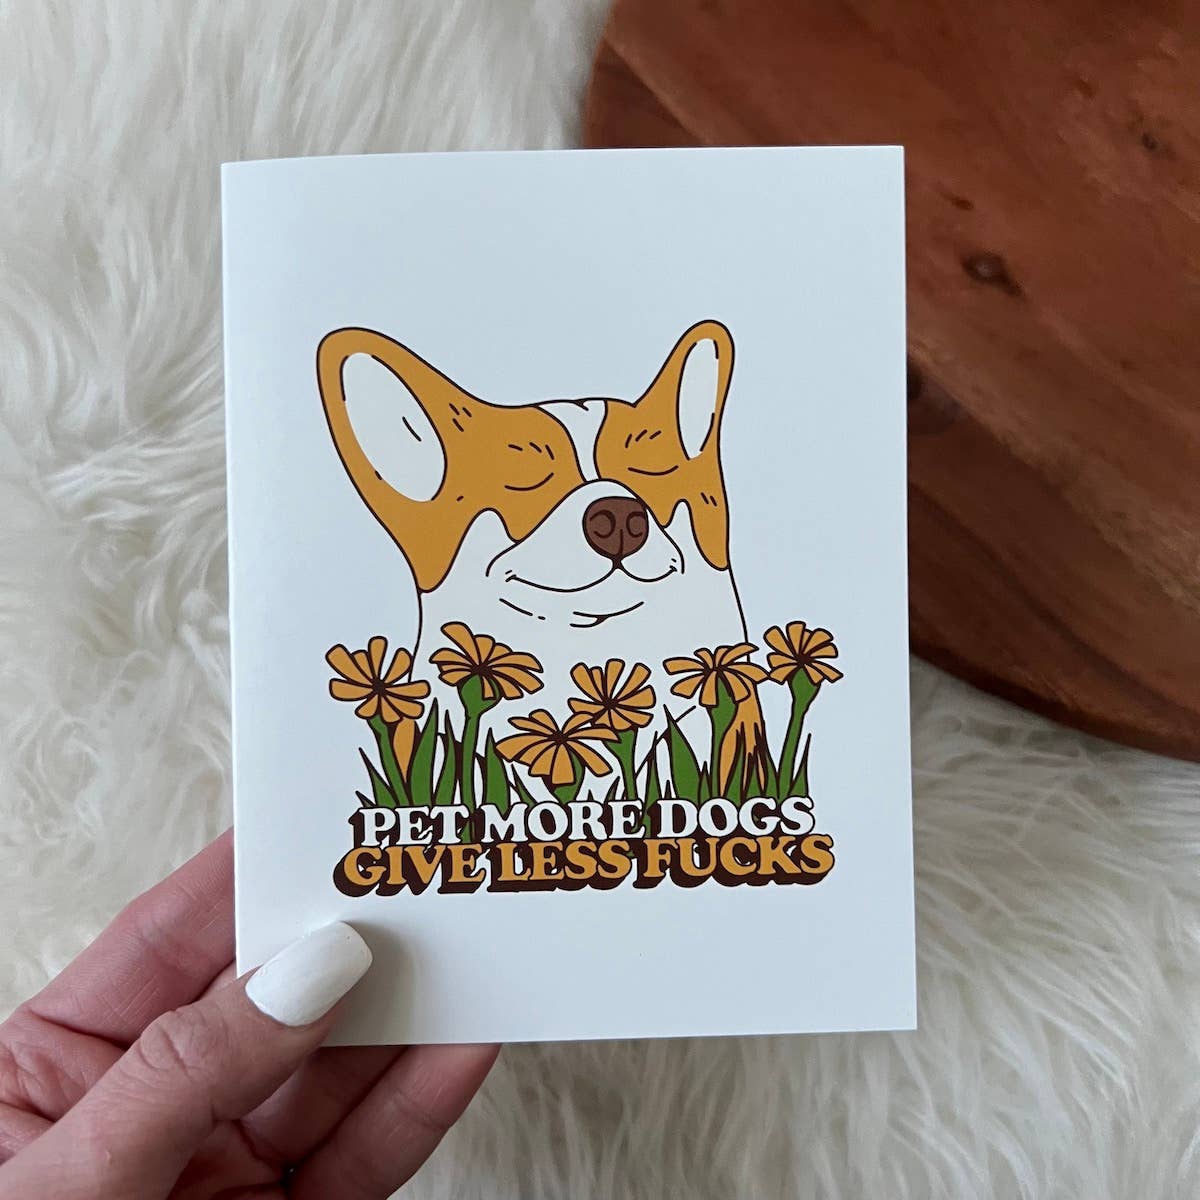 Greeting Card - Misc: Pet More Dogs - Give Less F*cks